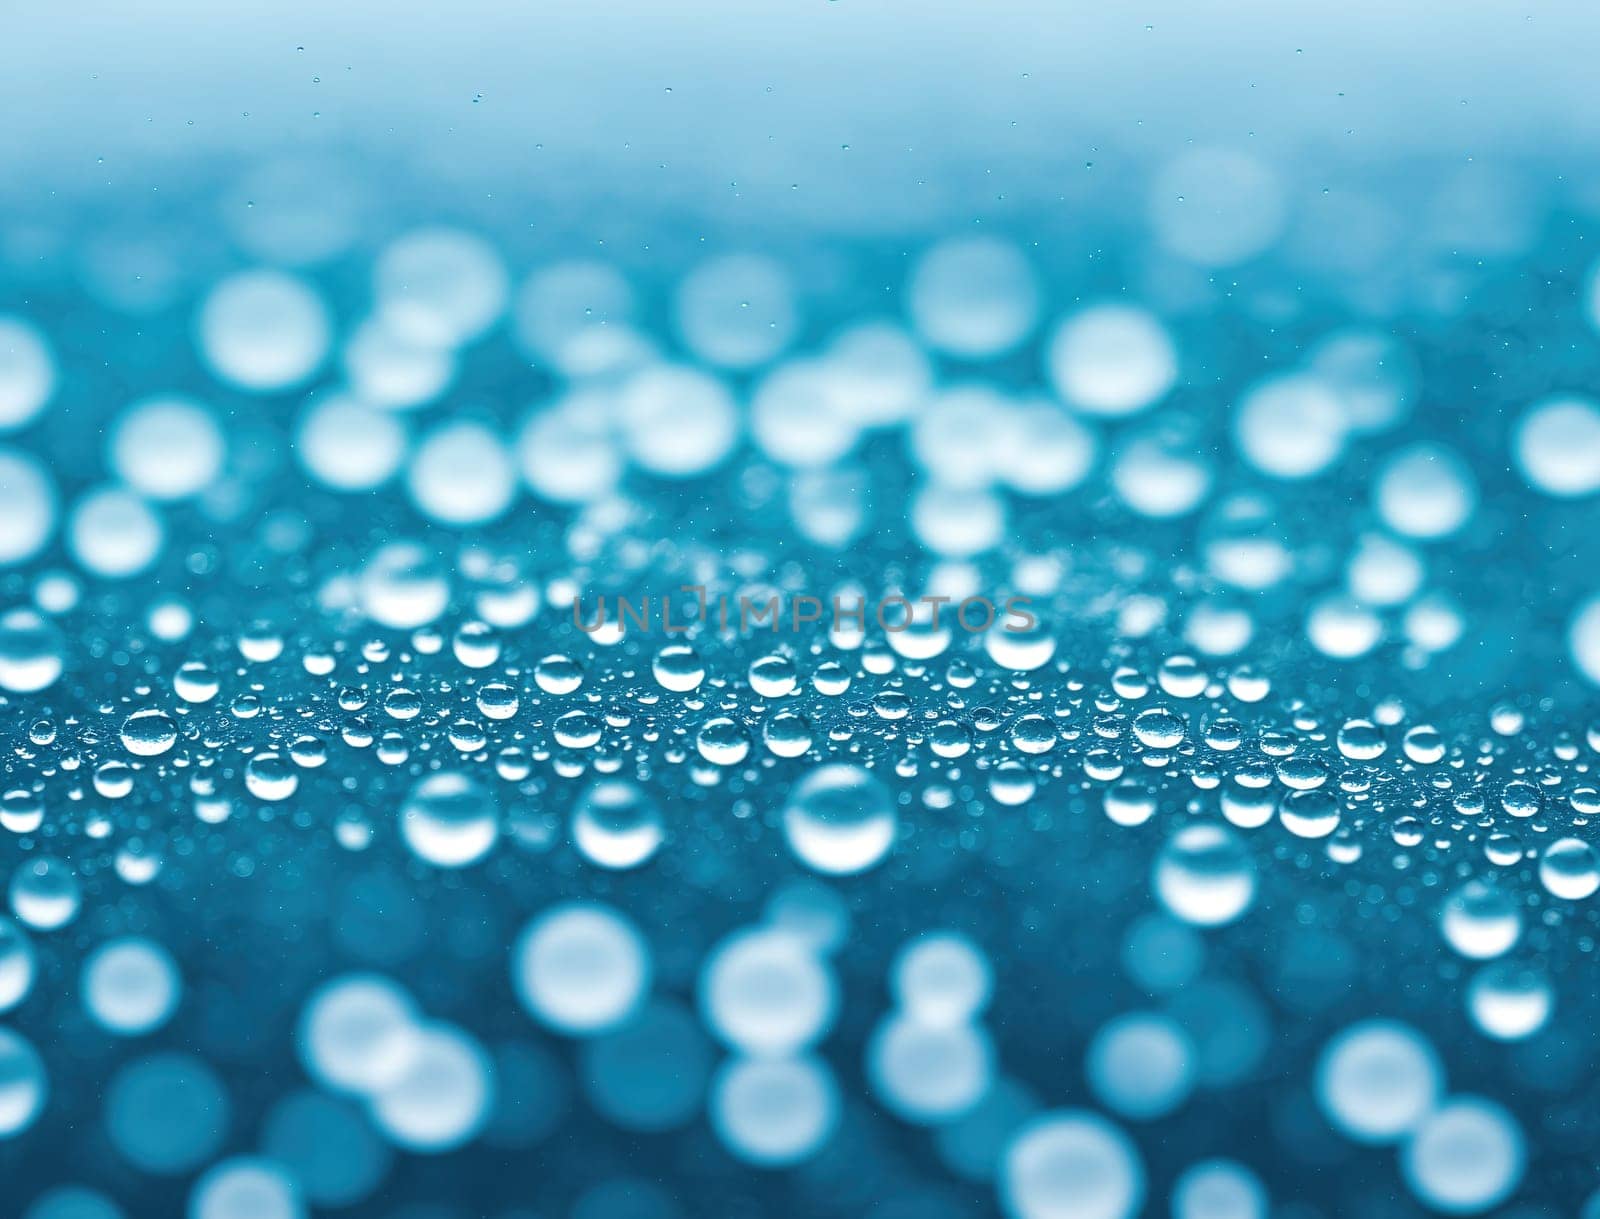 The image is a blue and white background with droplets of water on it.